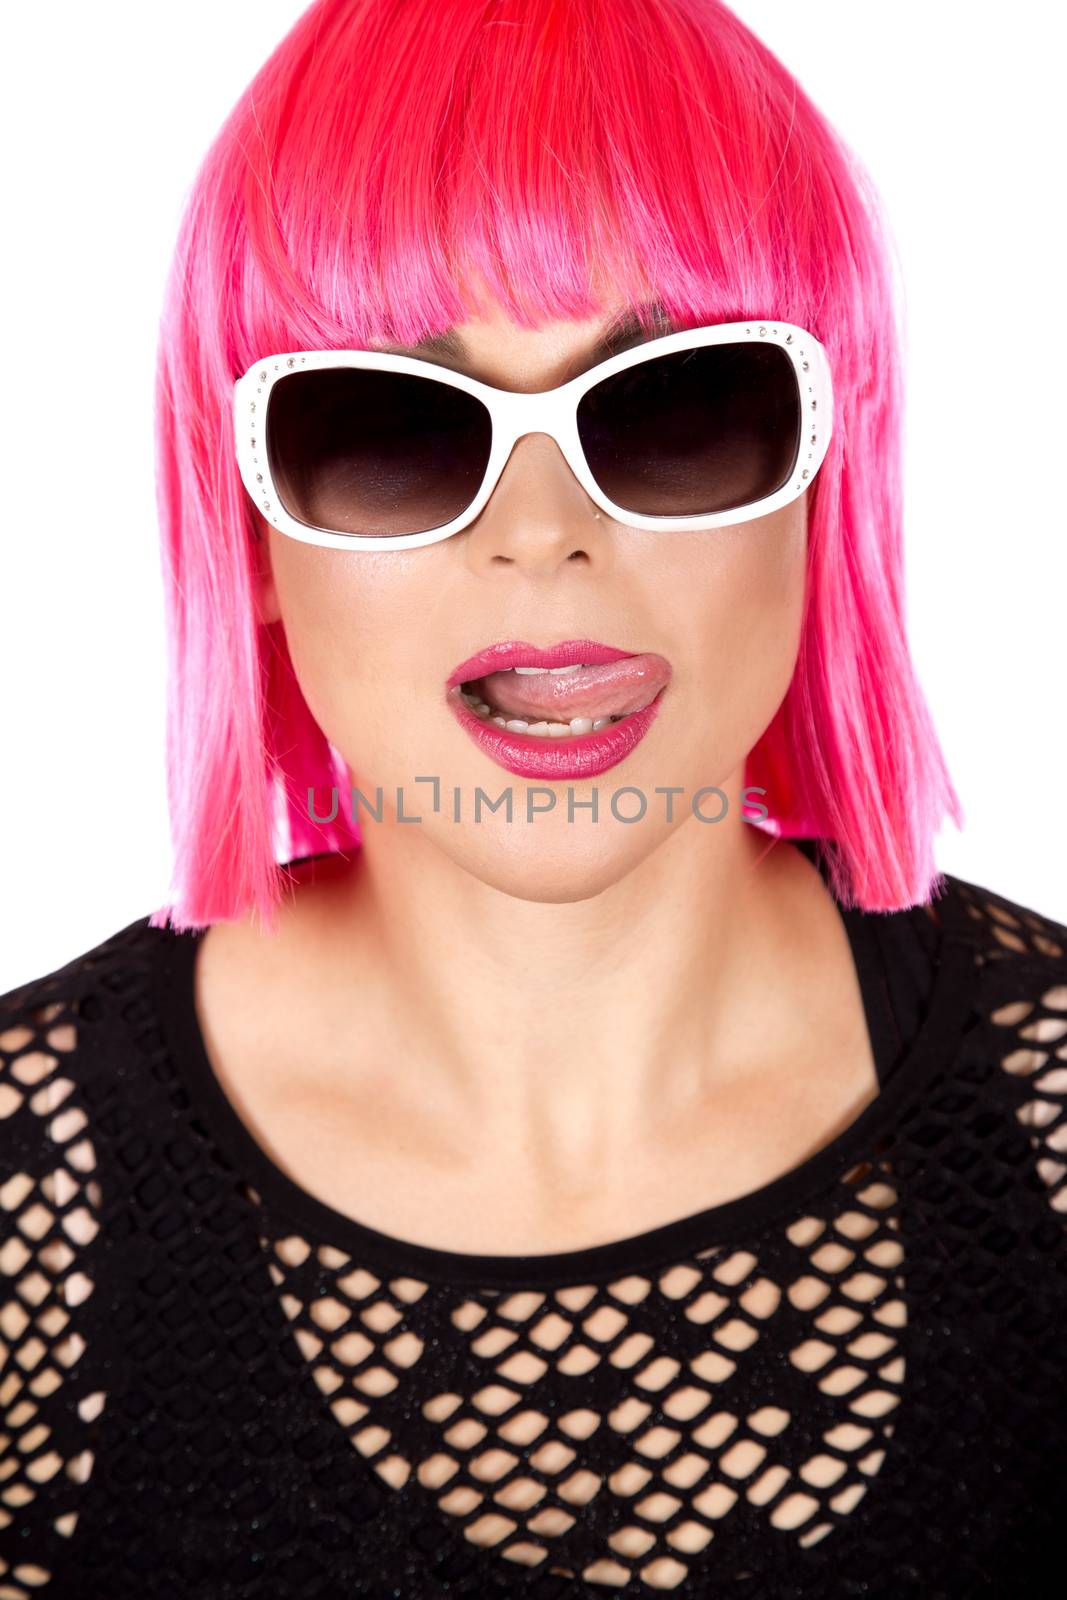 woman with pink hair wearing colorful stylish outfit